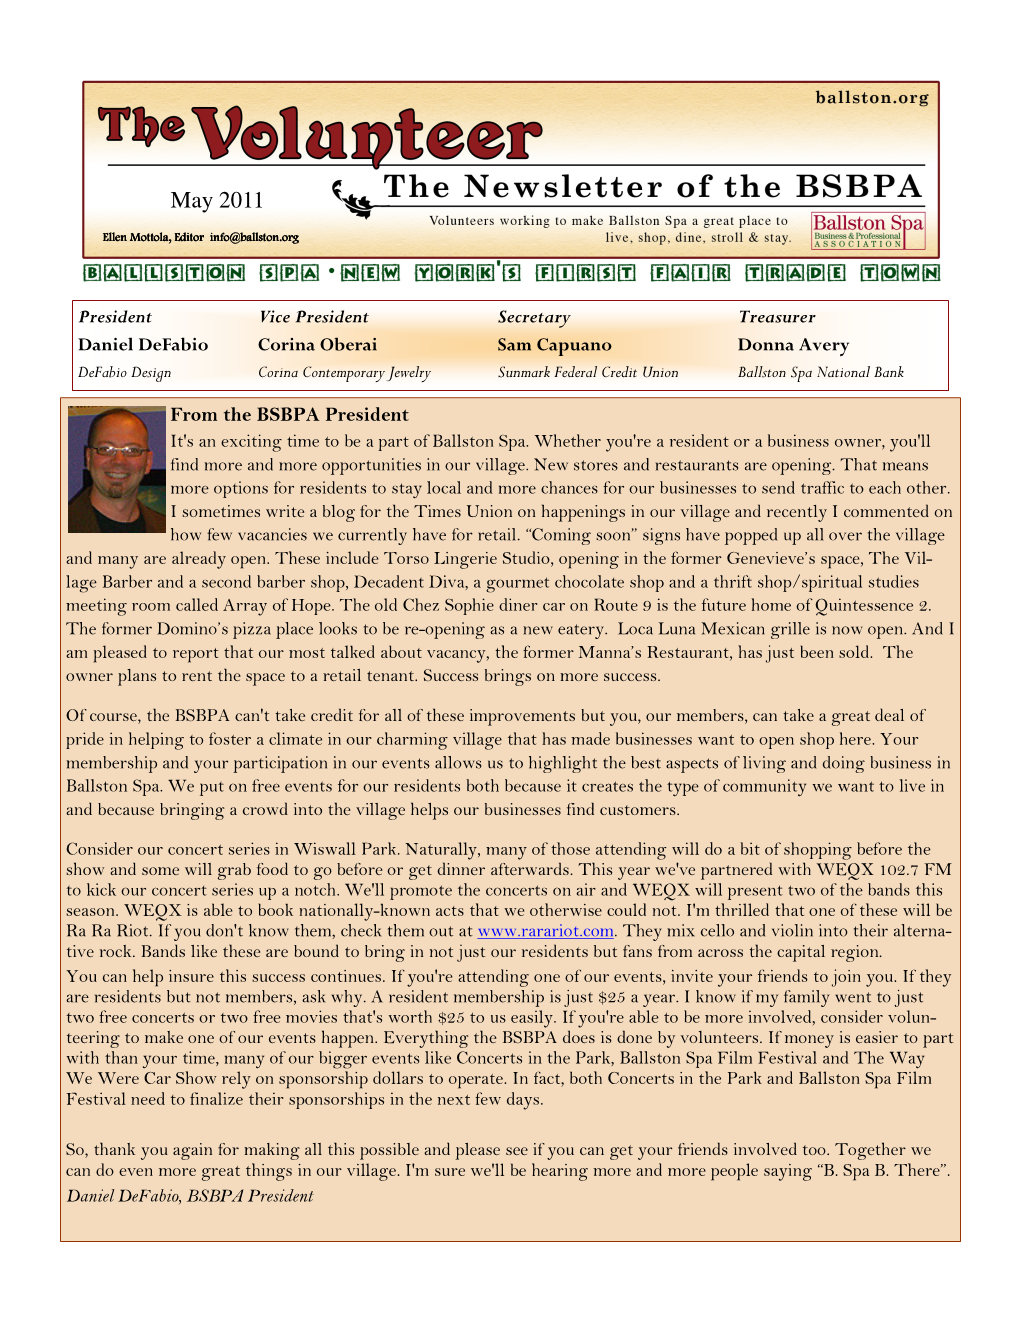 May 2011 BSBPA Newsletter DRAFT